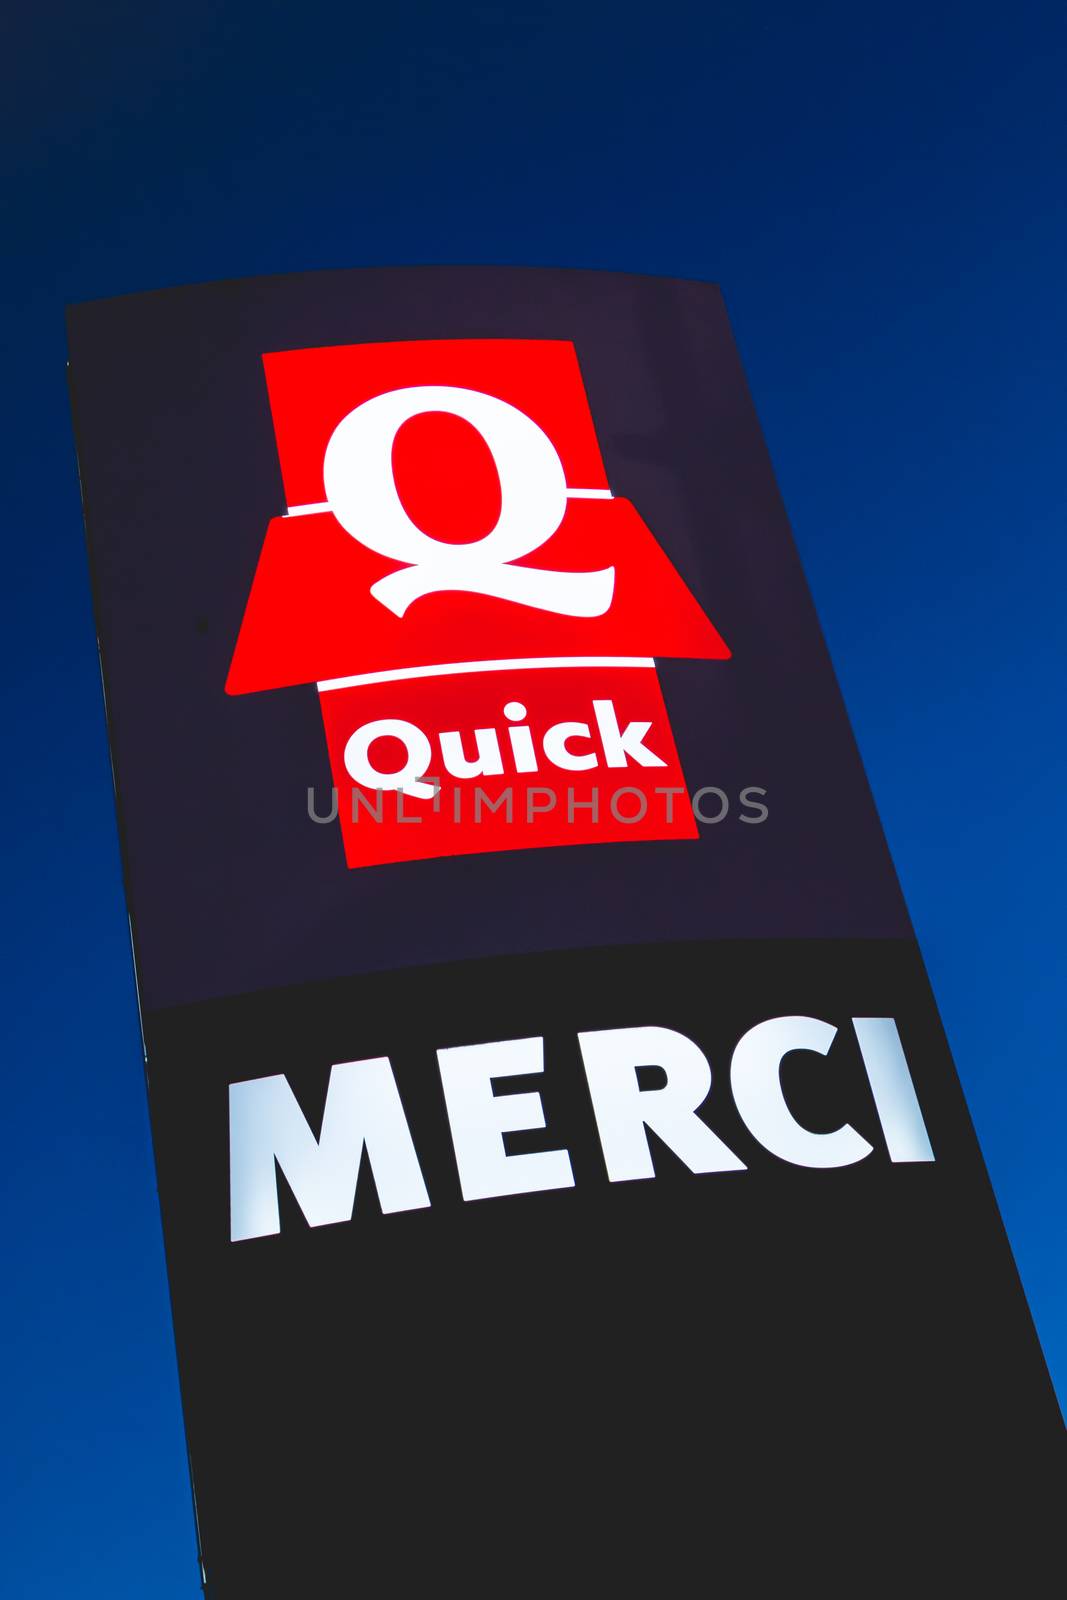 Olonne sur Mer, France - December 03, 2016 : Signs of the restaurant chain specialized in burgers "Quick" by night. The sign, located at the exit of the parking lot, bears the mention Thank you "Merci" in french